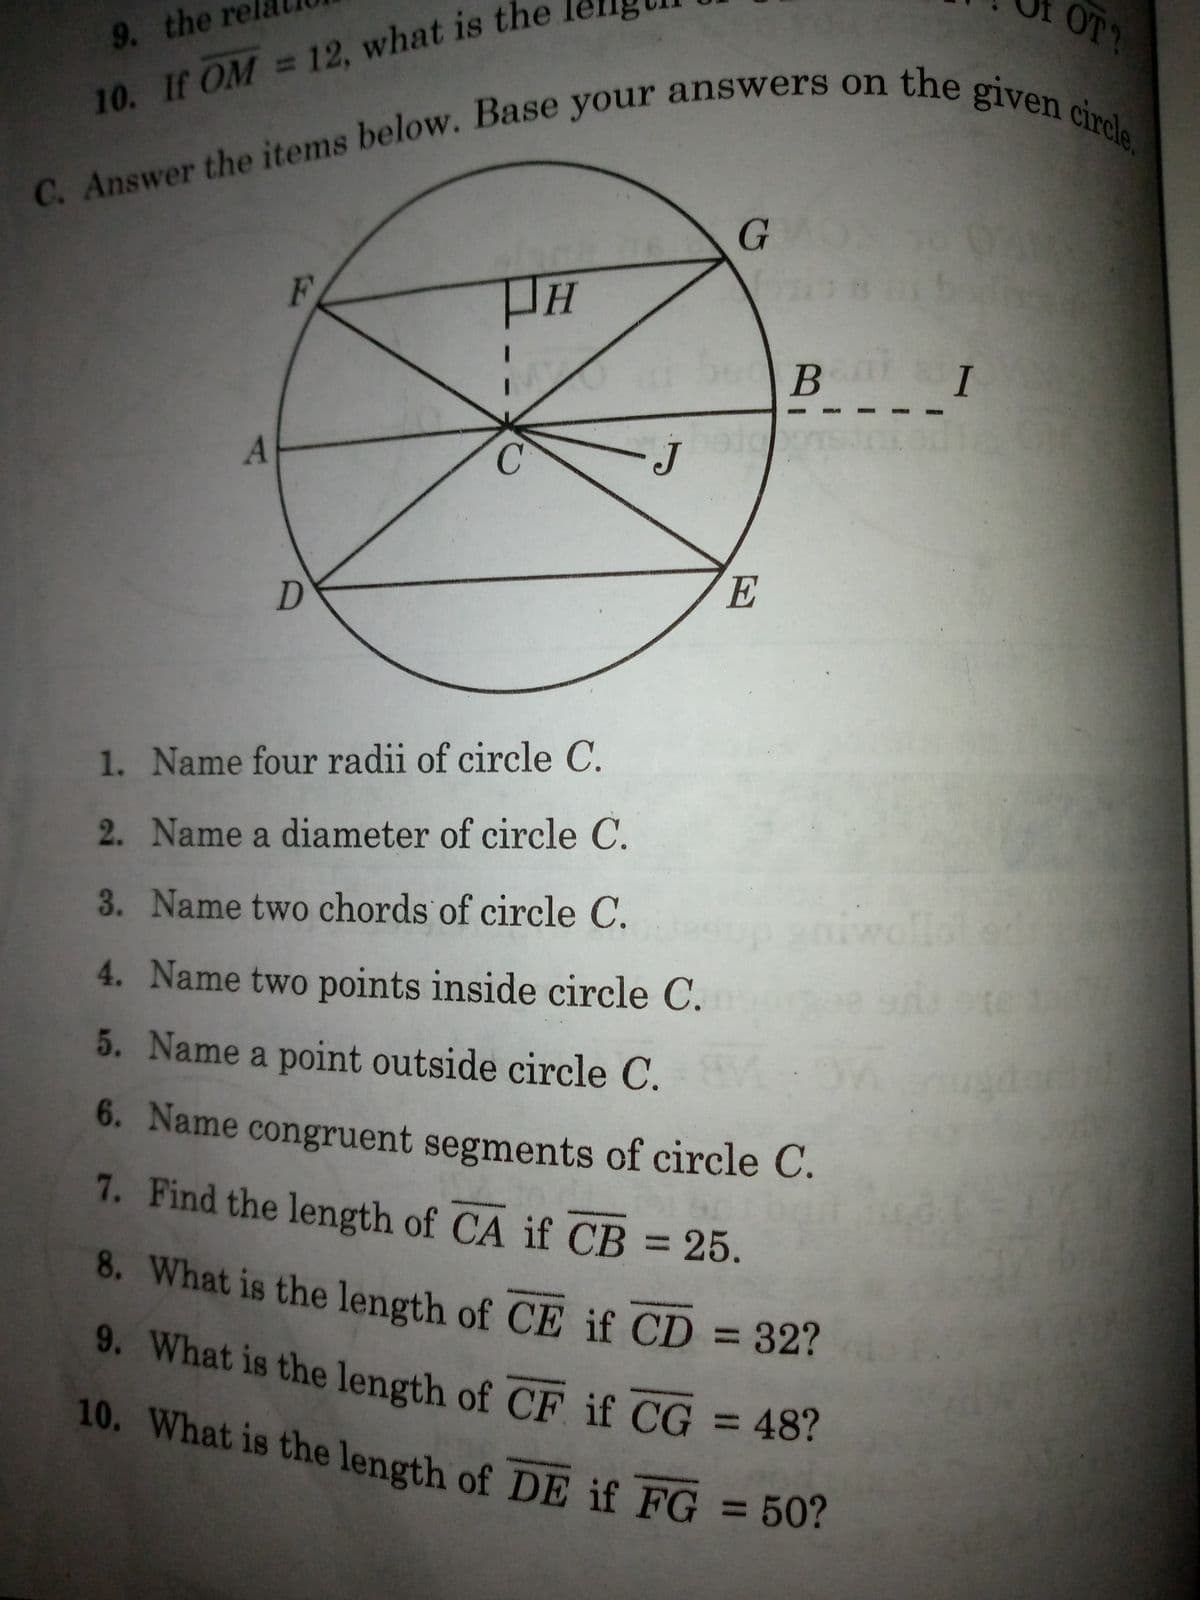 9. the rel
9. What is the length of CF if CG = 48?
10. What is the length of DE if FG = 50?
OT?
10. If OM = 12, what is the
07
B I
C.
E
1. Name four radii of circle C.
2. Name a diameter of circle C.
3. Name two chords of circle C.
iwolla
4. Name two points inside circle C.
5. Name a point outside circle C.
6. Name congruent segments of circle C.
7. Find the length of CA if CB = 25.
8. What is the length of CE if CD = 32?
%3D
9. What is the length of CF if CG
10. What is the length of DE if FG = 50?
